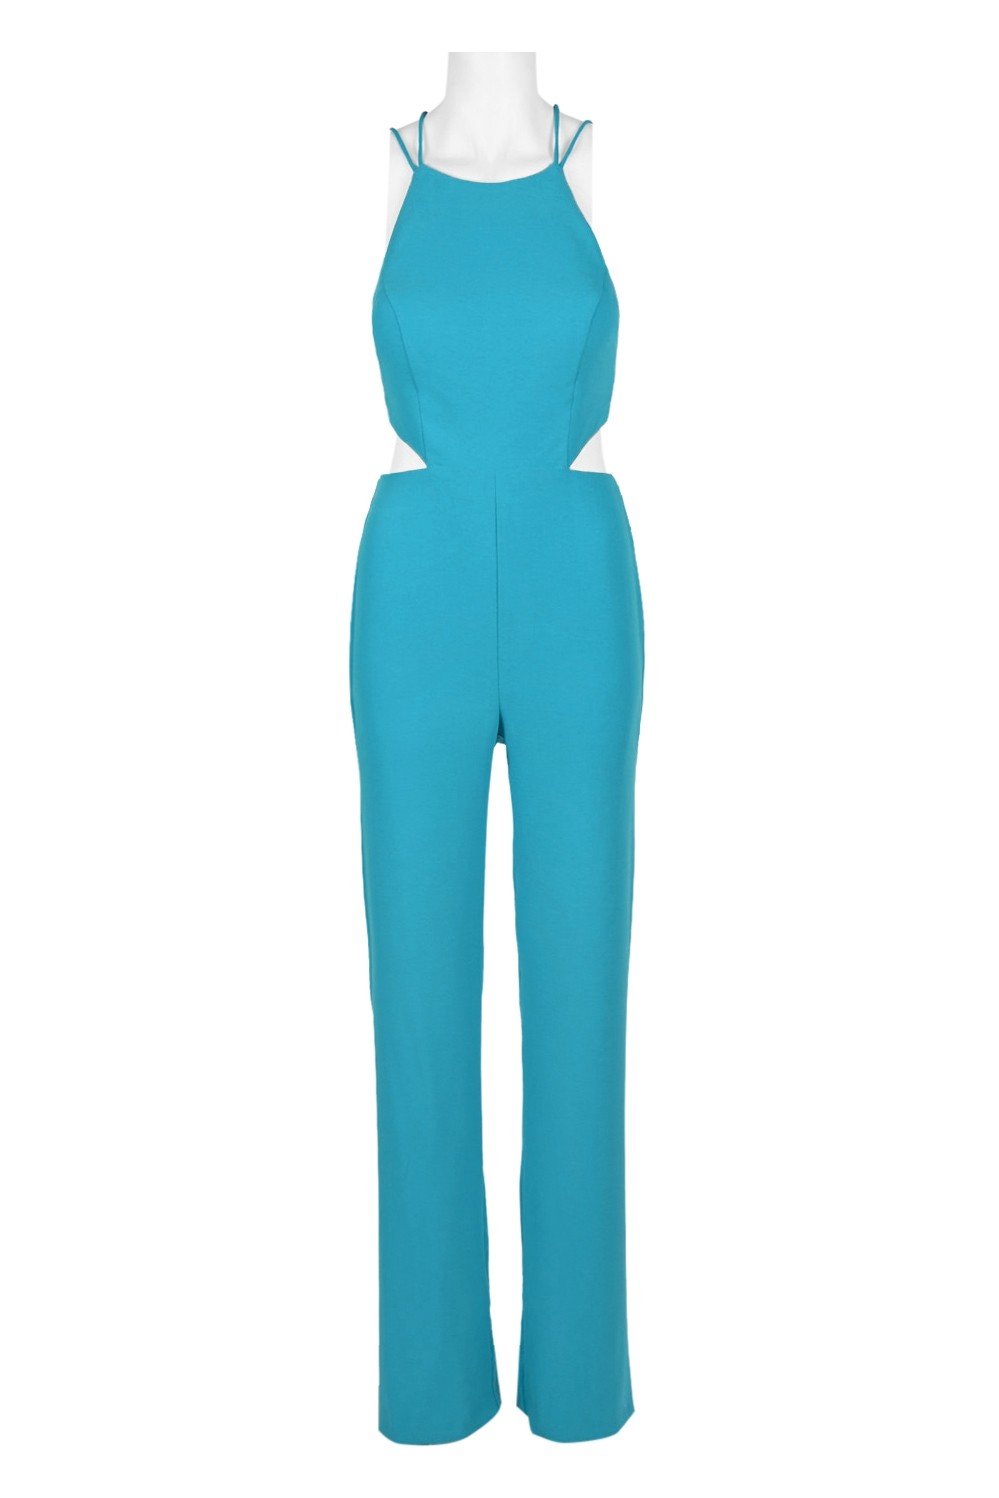 Aidan Mattox - MN1E204053 Sleeveless Halter Jumpsuit With Back Ties In Blue and Green